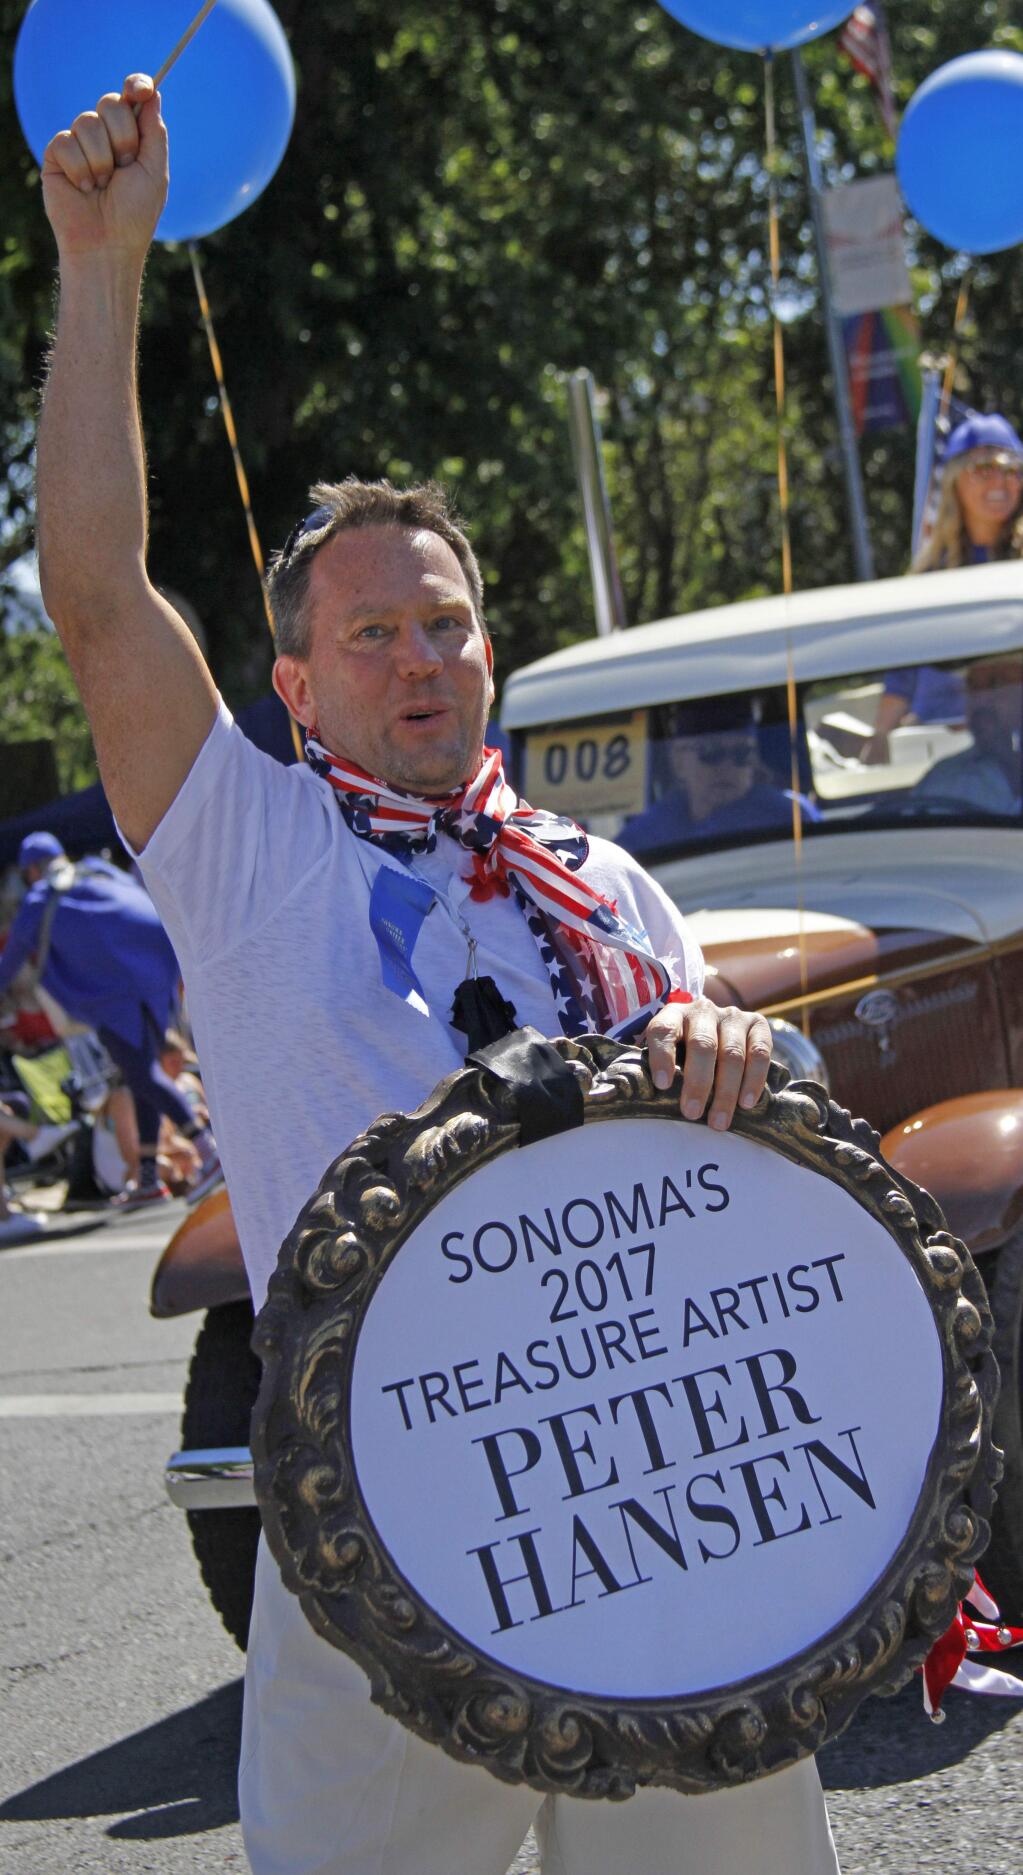 Sonoma's Treasure Artist Peter Hansen was having a great time during Sonoma's annual July 4 parade Tuesday. Photos by Bill Hoban/Index-Tribune